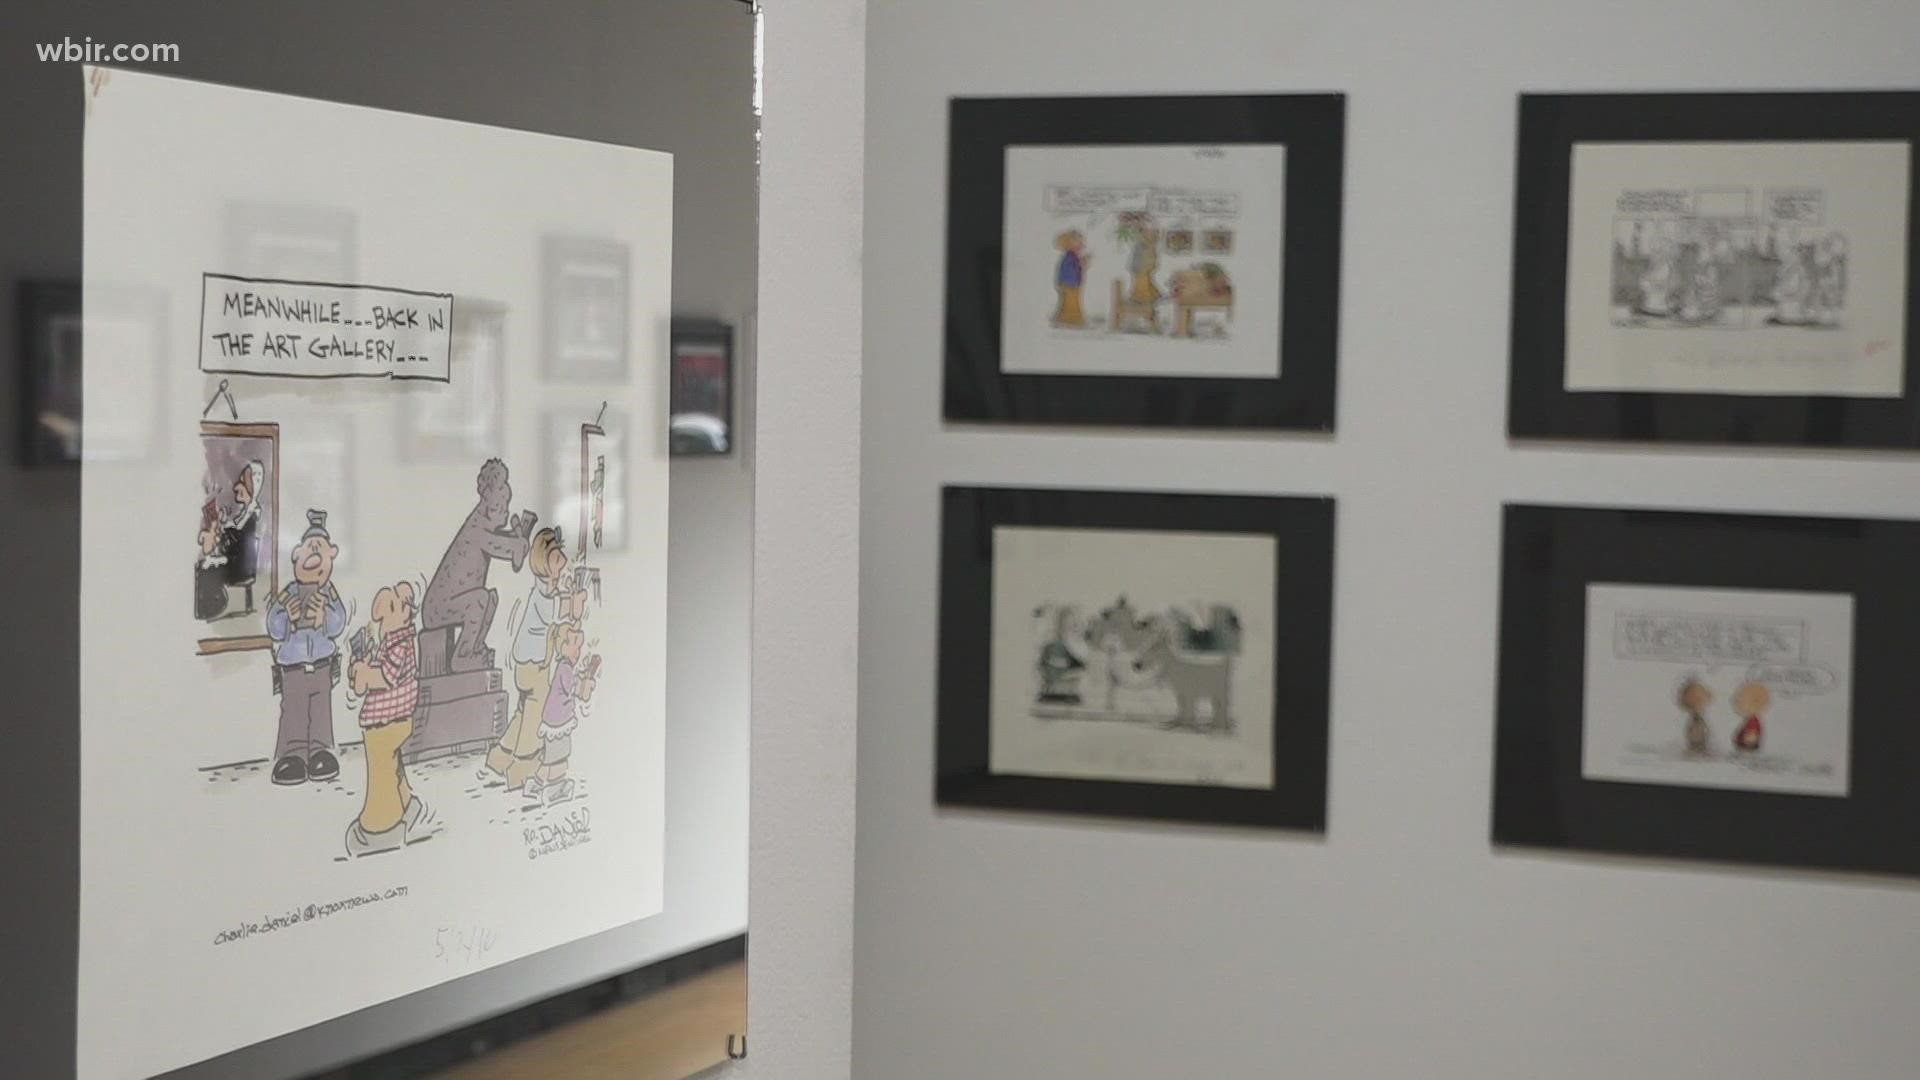 Newspaper cartoonists shared their comics at different galleries across Knoxville.